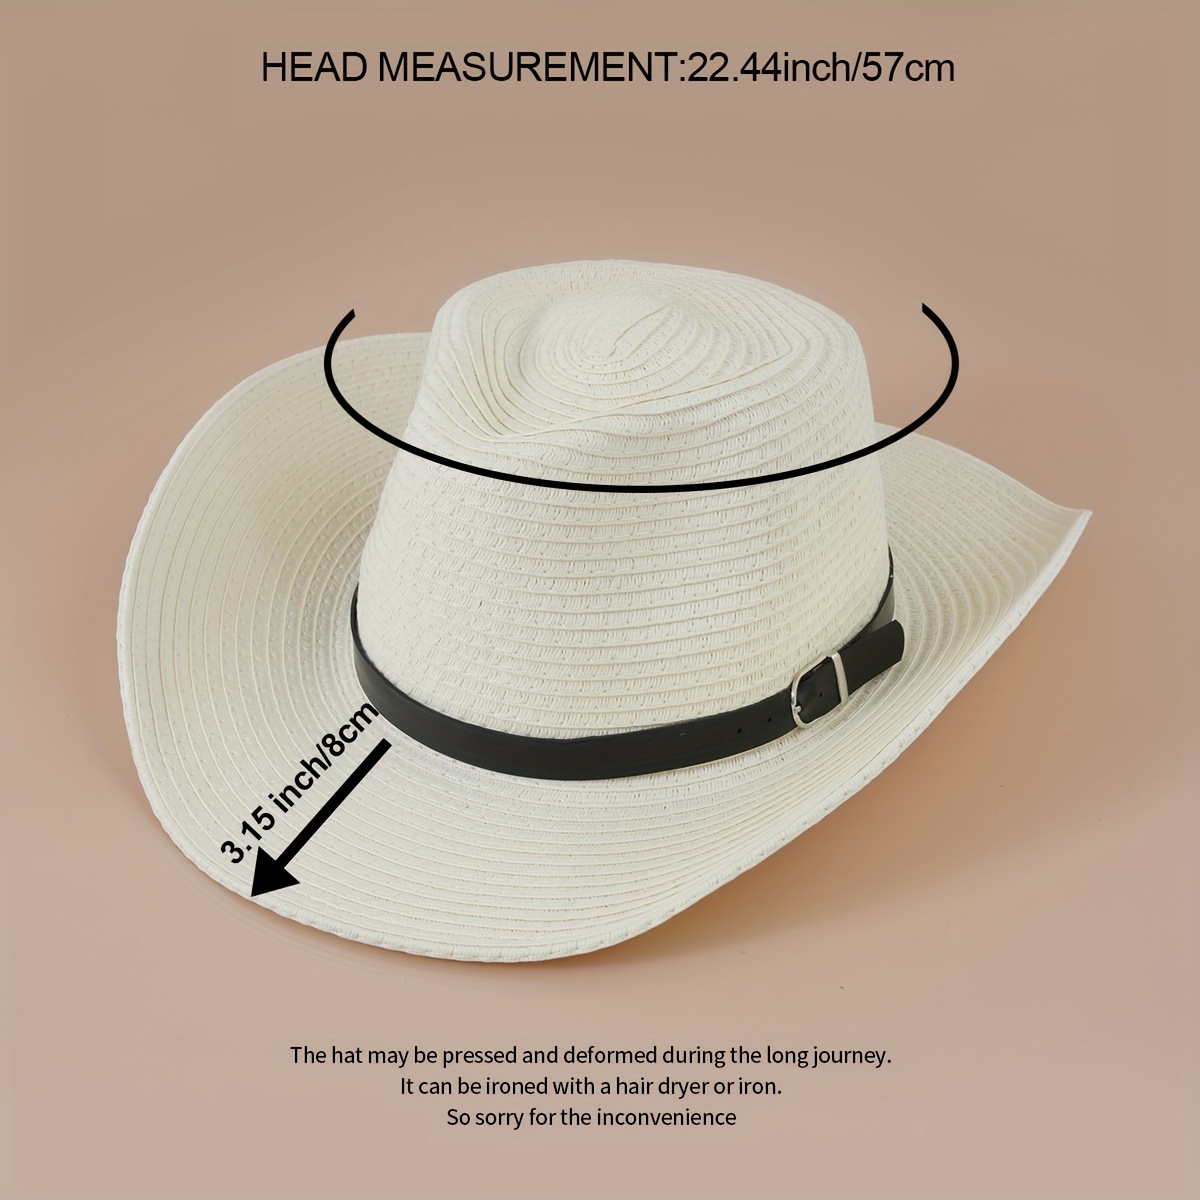 1pc Sun Hats For Men Women, Wide Brim Handmade Straw Beach Hat, Brearhable  And Foldable Packable Cap For Travel